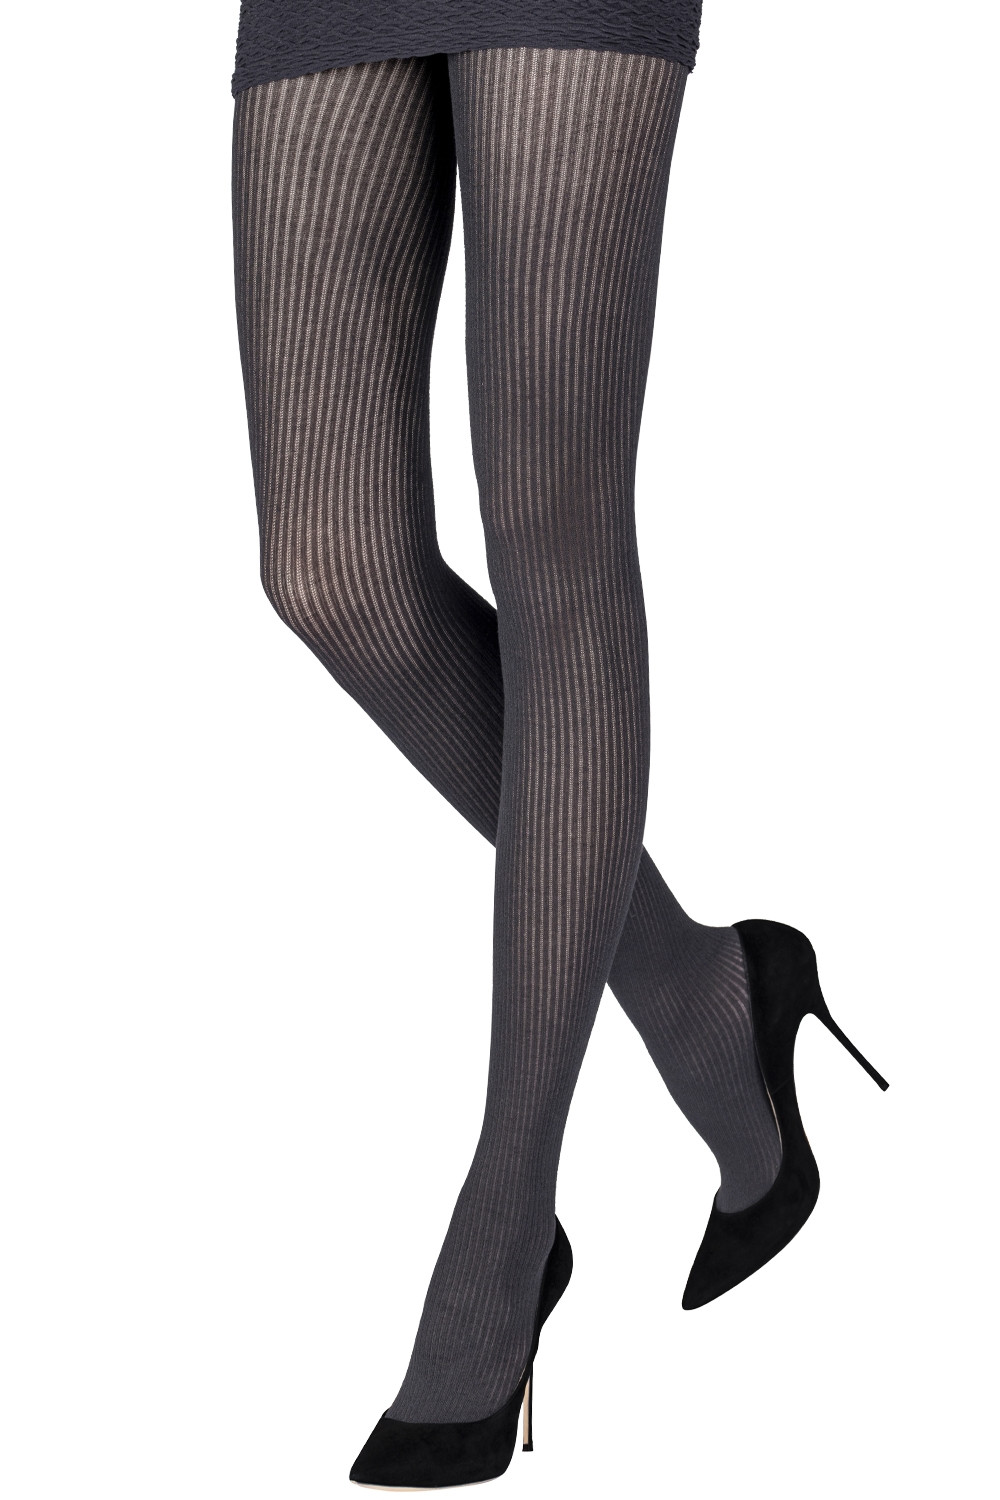 Sexy Long Stockings Black Mesh Tights Women Designers Socks Fashion Black  Thin Lace Mesh Tights Soft Breathable Letter Tight Panty Hose From  Universe_02, $18.98